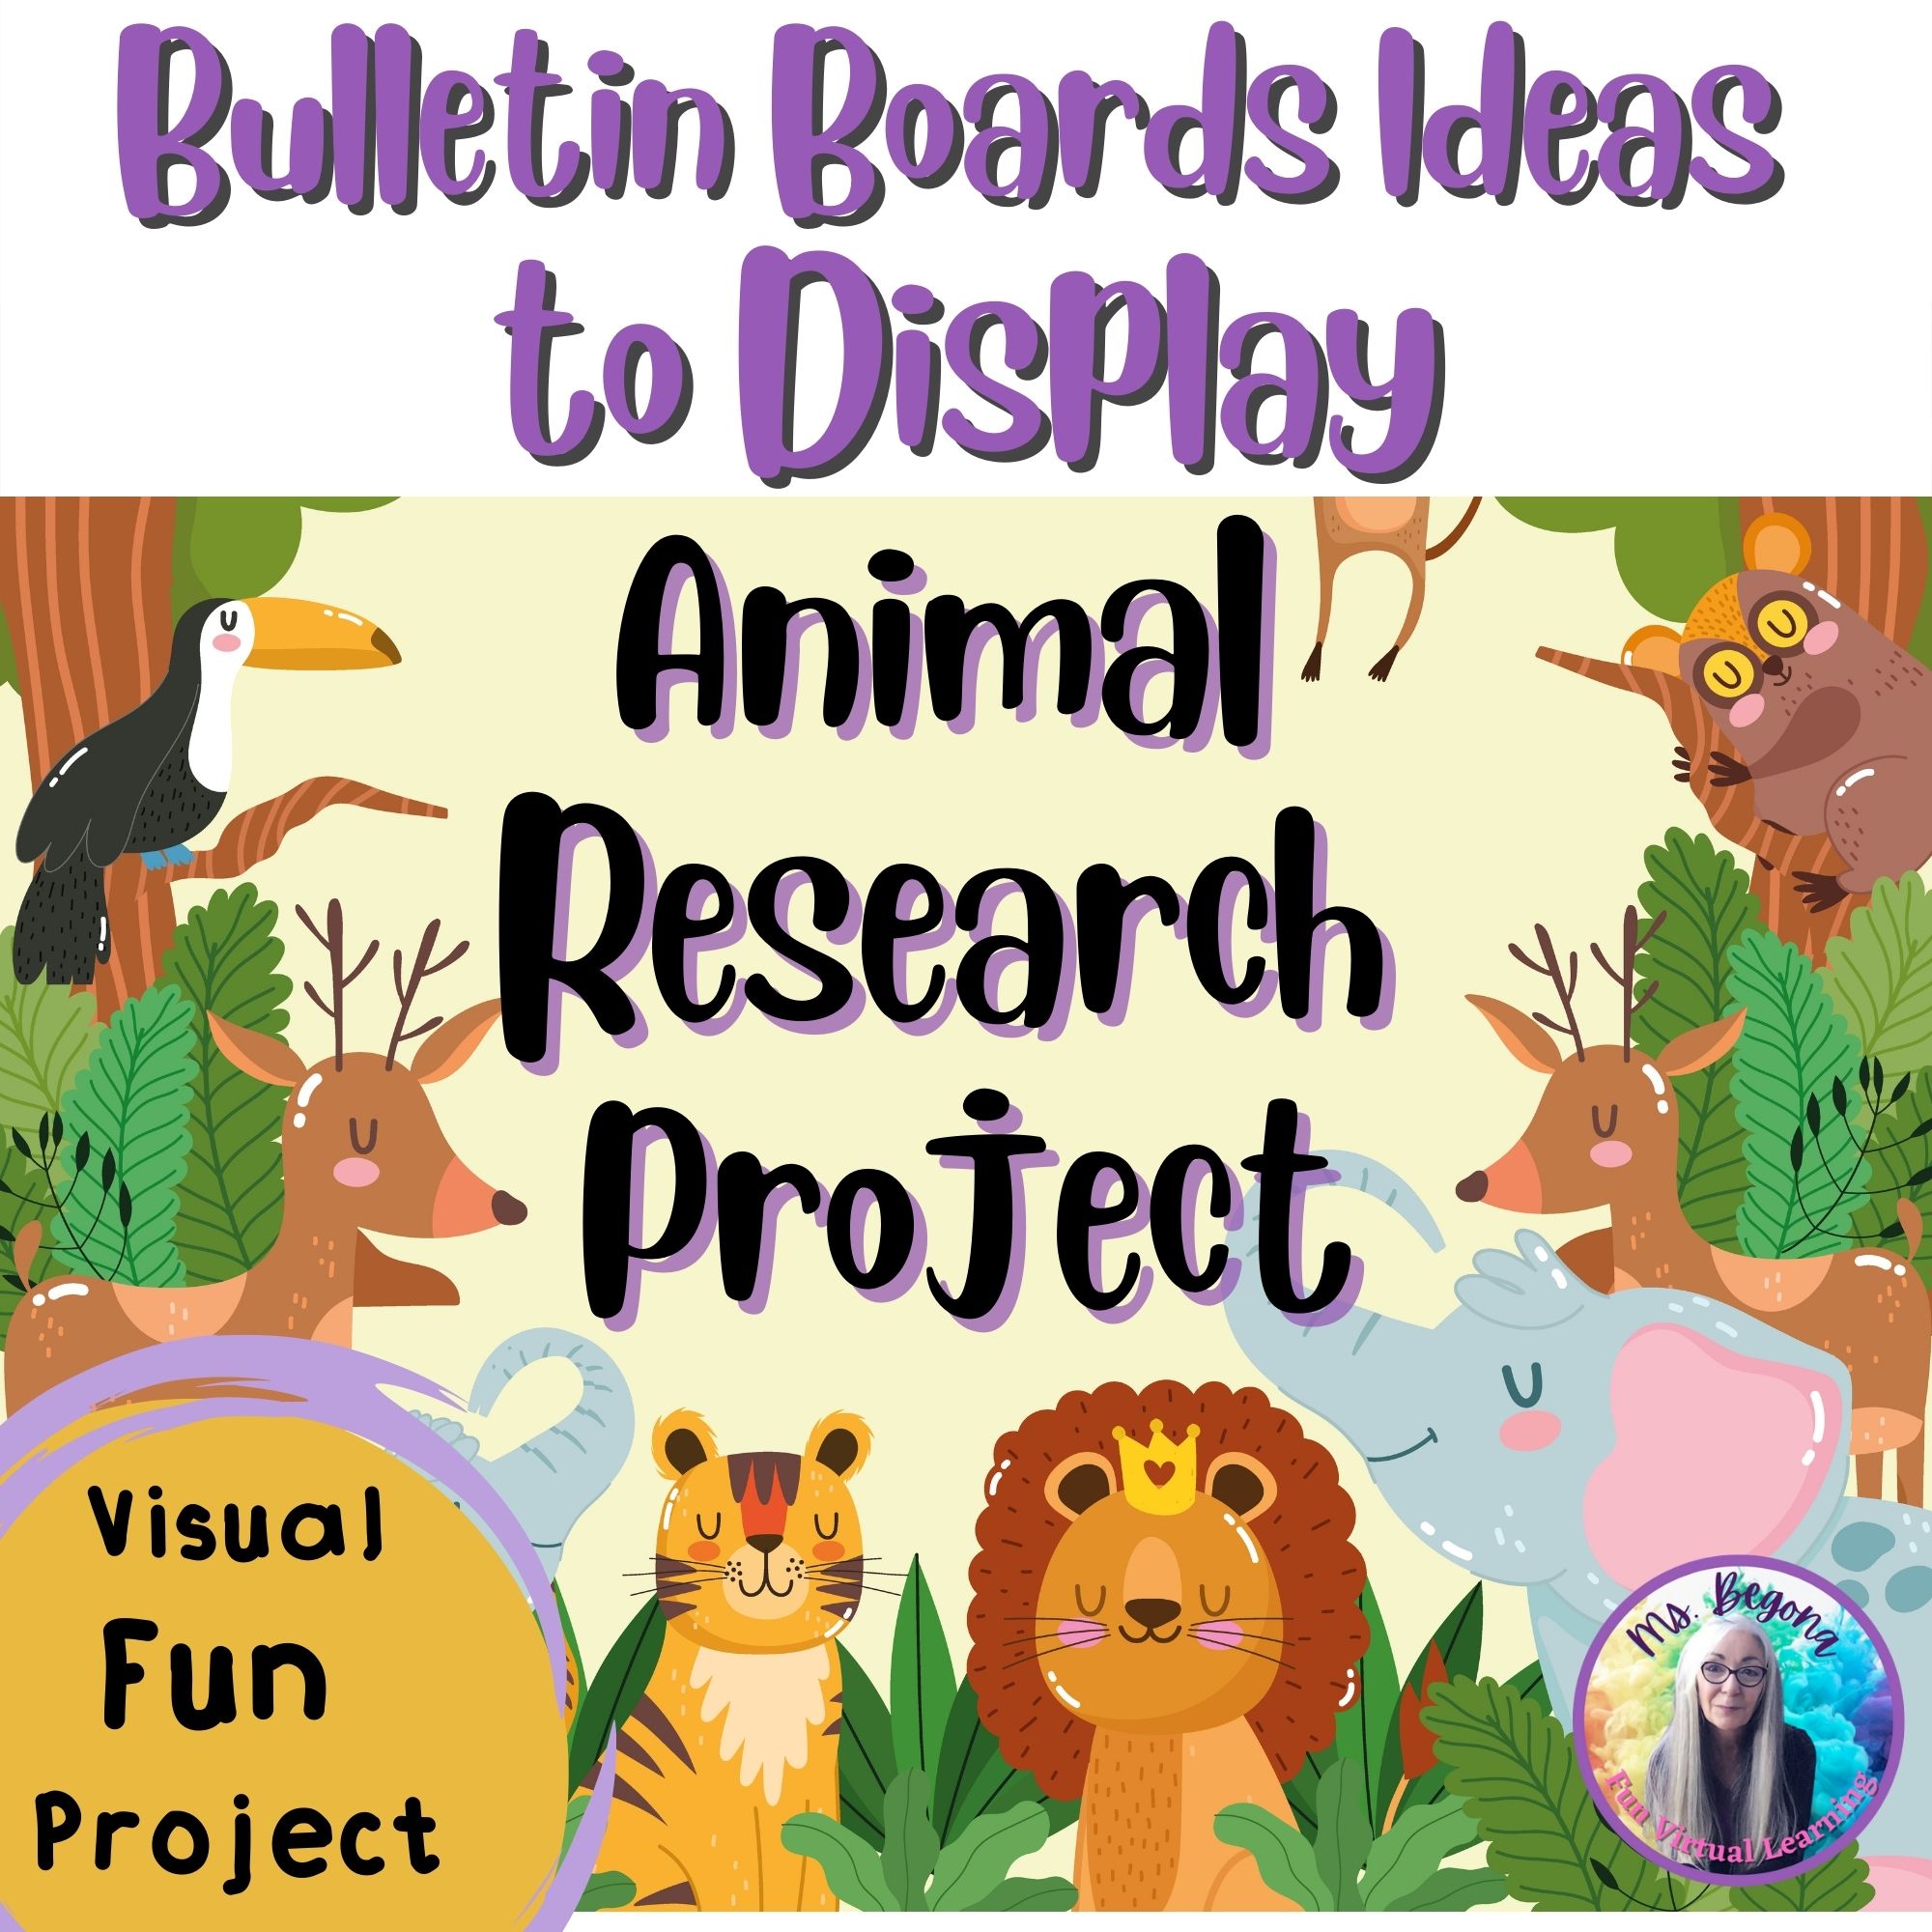 Animal Research Project - Classroom or Bulletin Boards Decor